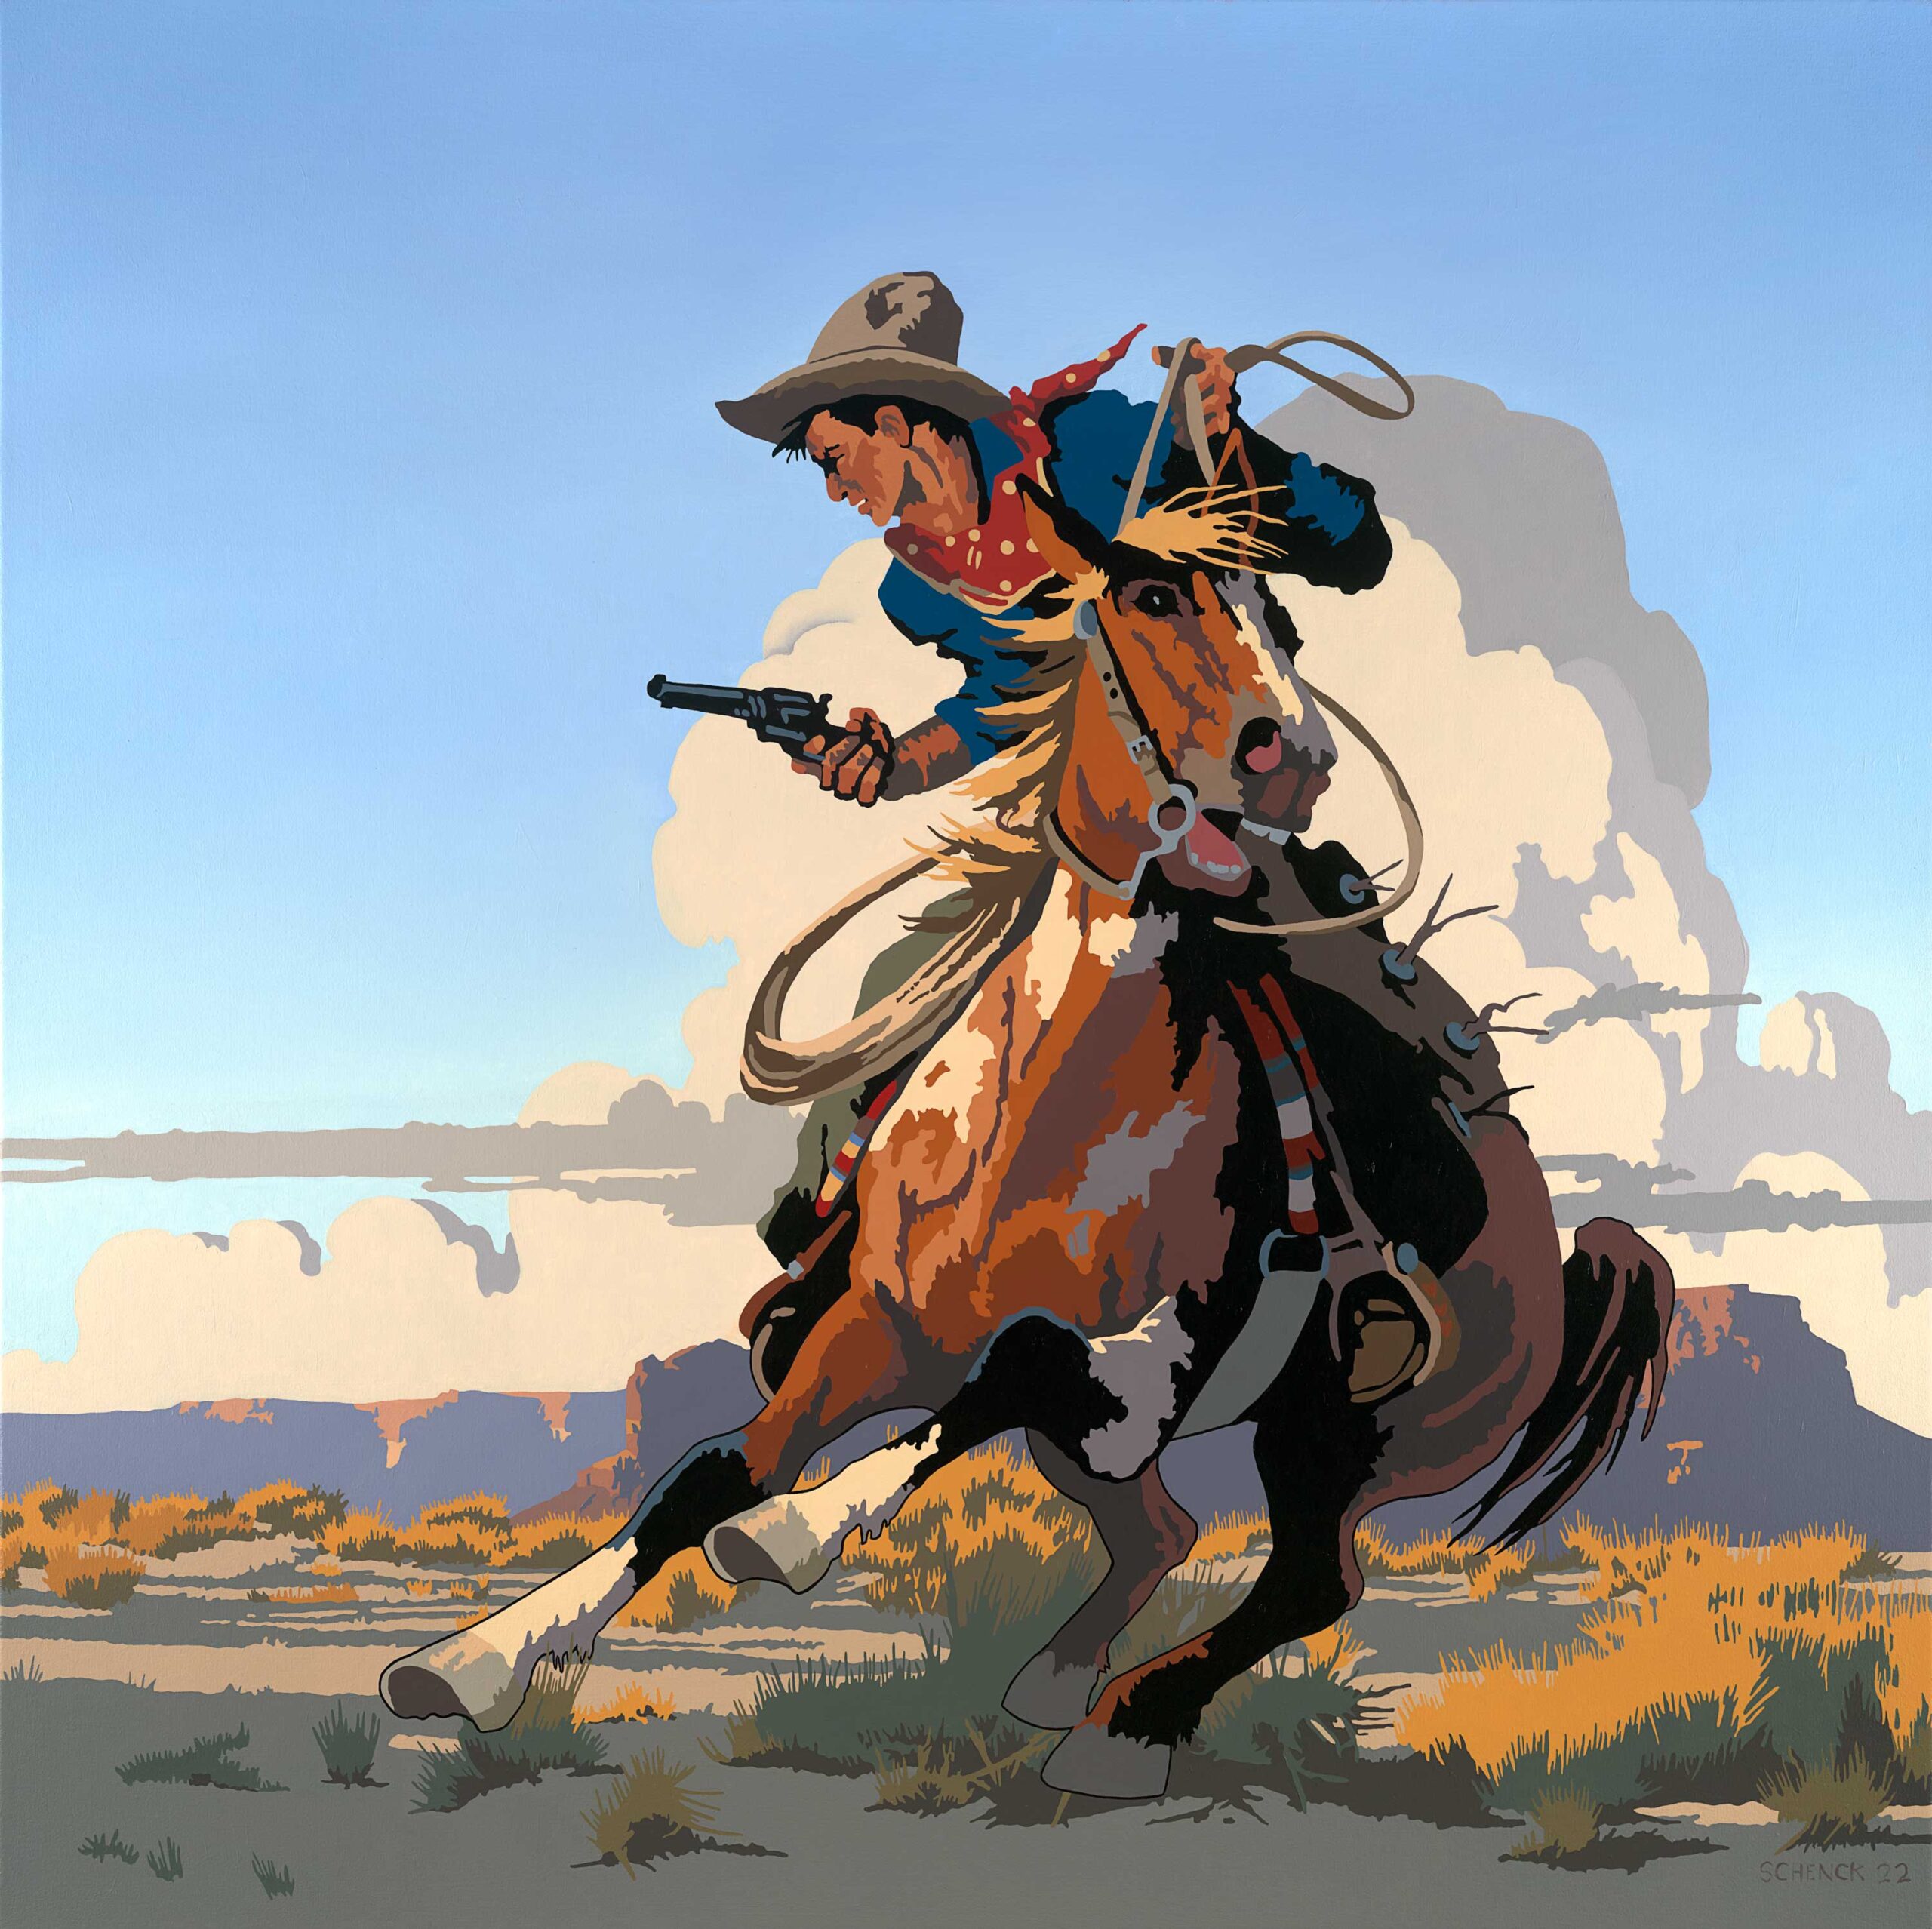 Painting of a cowboy - Billy Schenck, "Rider from the Heart 3 Ranch," oil on canvas, 45 x 45 in.